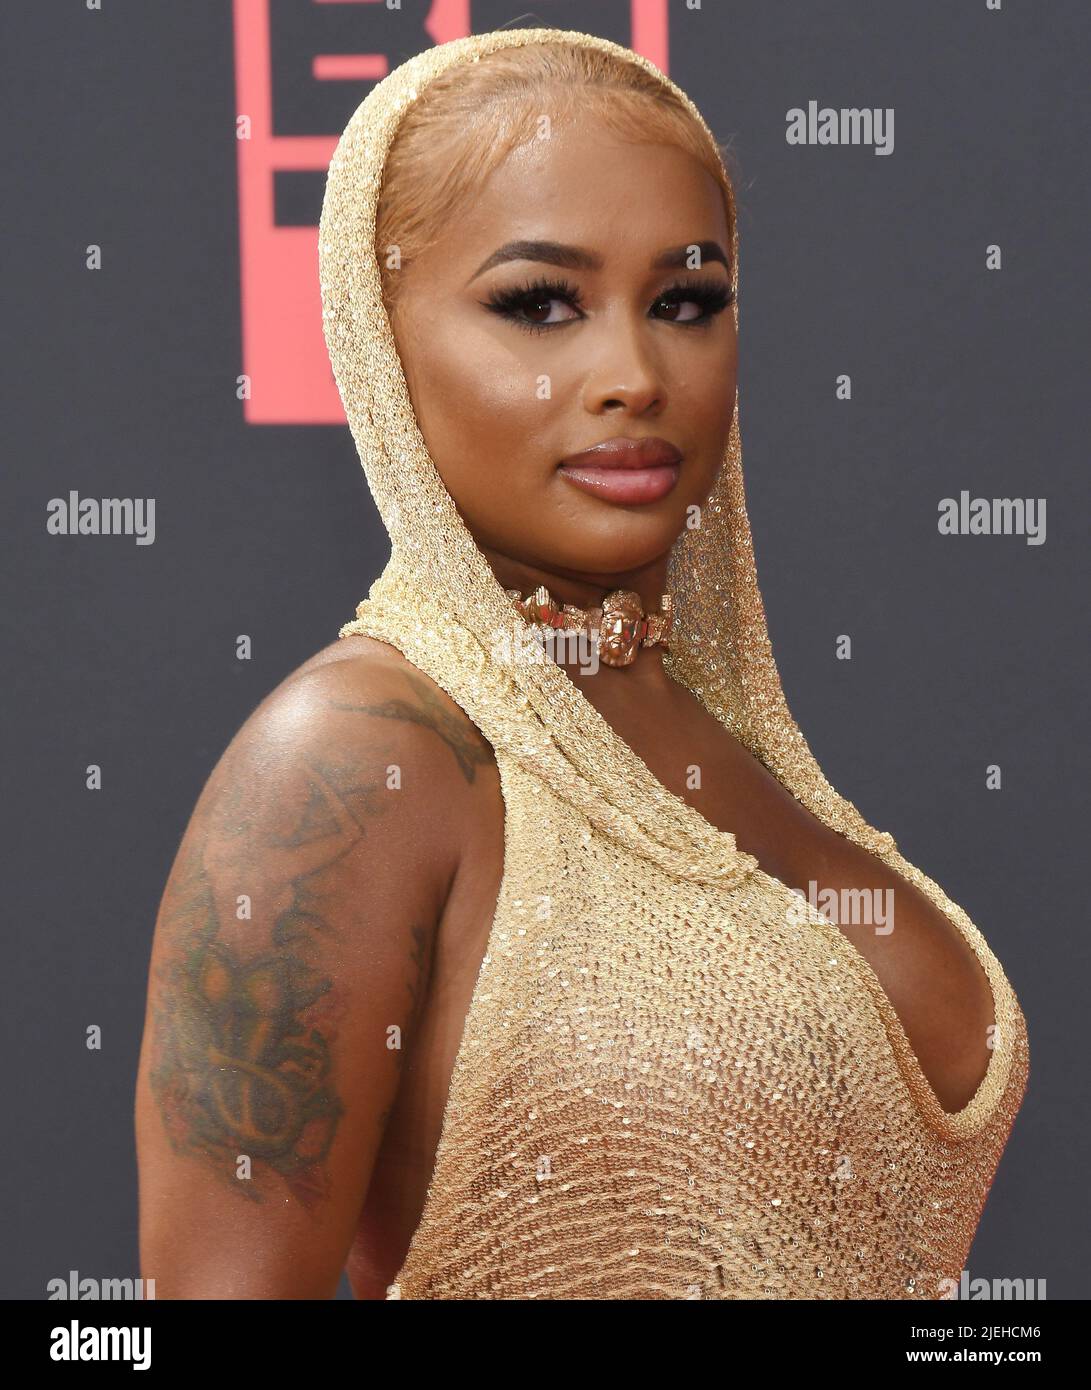 Los Angeles, USA. 26th June, 2022. DreamDoll arrives at the BET Awards 2022 held at the Microsoft Theater in Los Angeles, CA on Sunday, ?June 26, 2022. (Photo By Sthanlee B. Mirador/Sipa USA) Credit: Sipa US/Alamy Live News Stock Photo